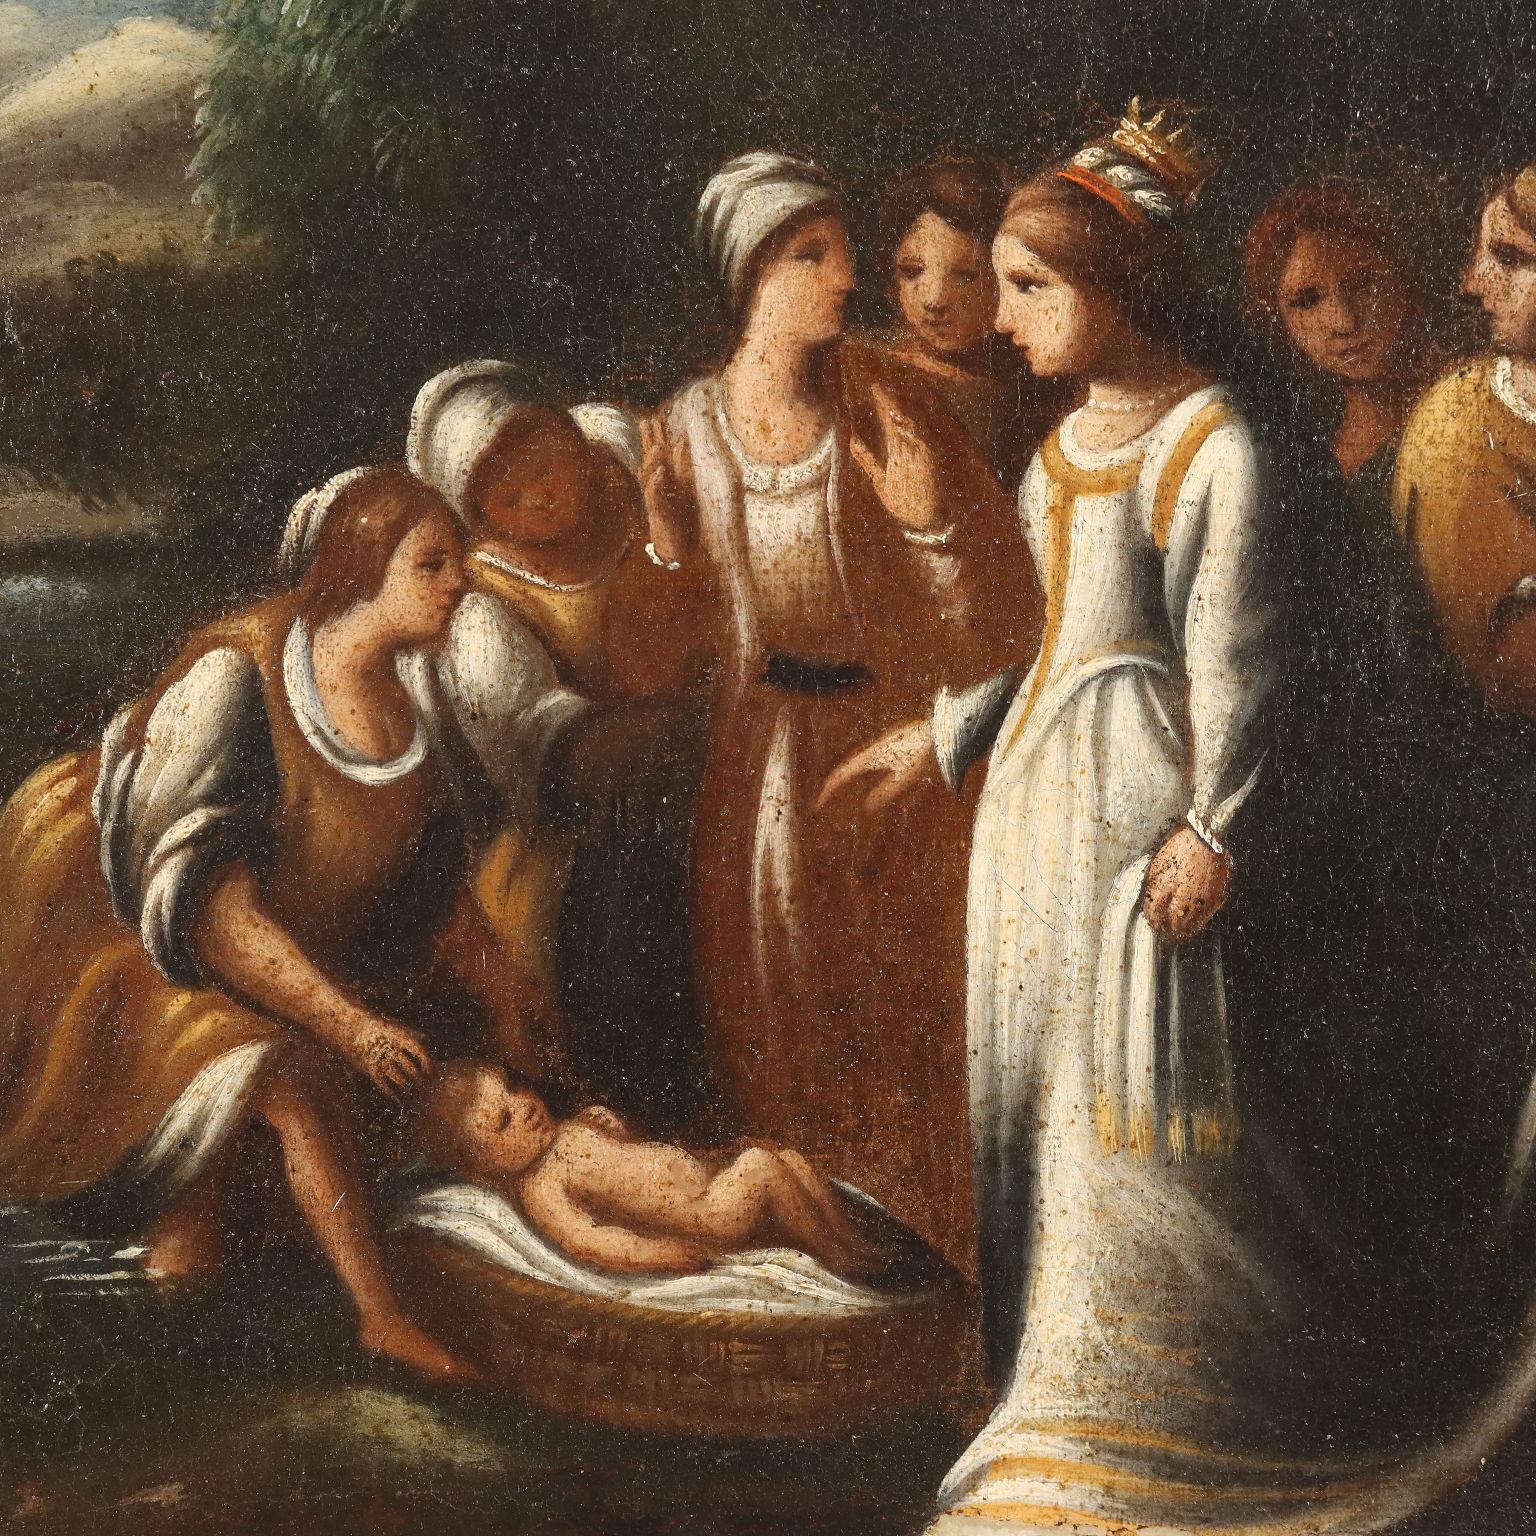 Oil on Canvas. 
The scene recounts the biblical episode from the book of Exodus in which baby Moses, whom his mother had entrusted to the river inside a basket to save him from the slaughter of Israel's male children  (ordered by the Pharaoh of